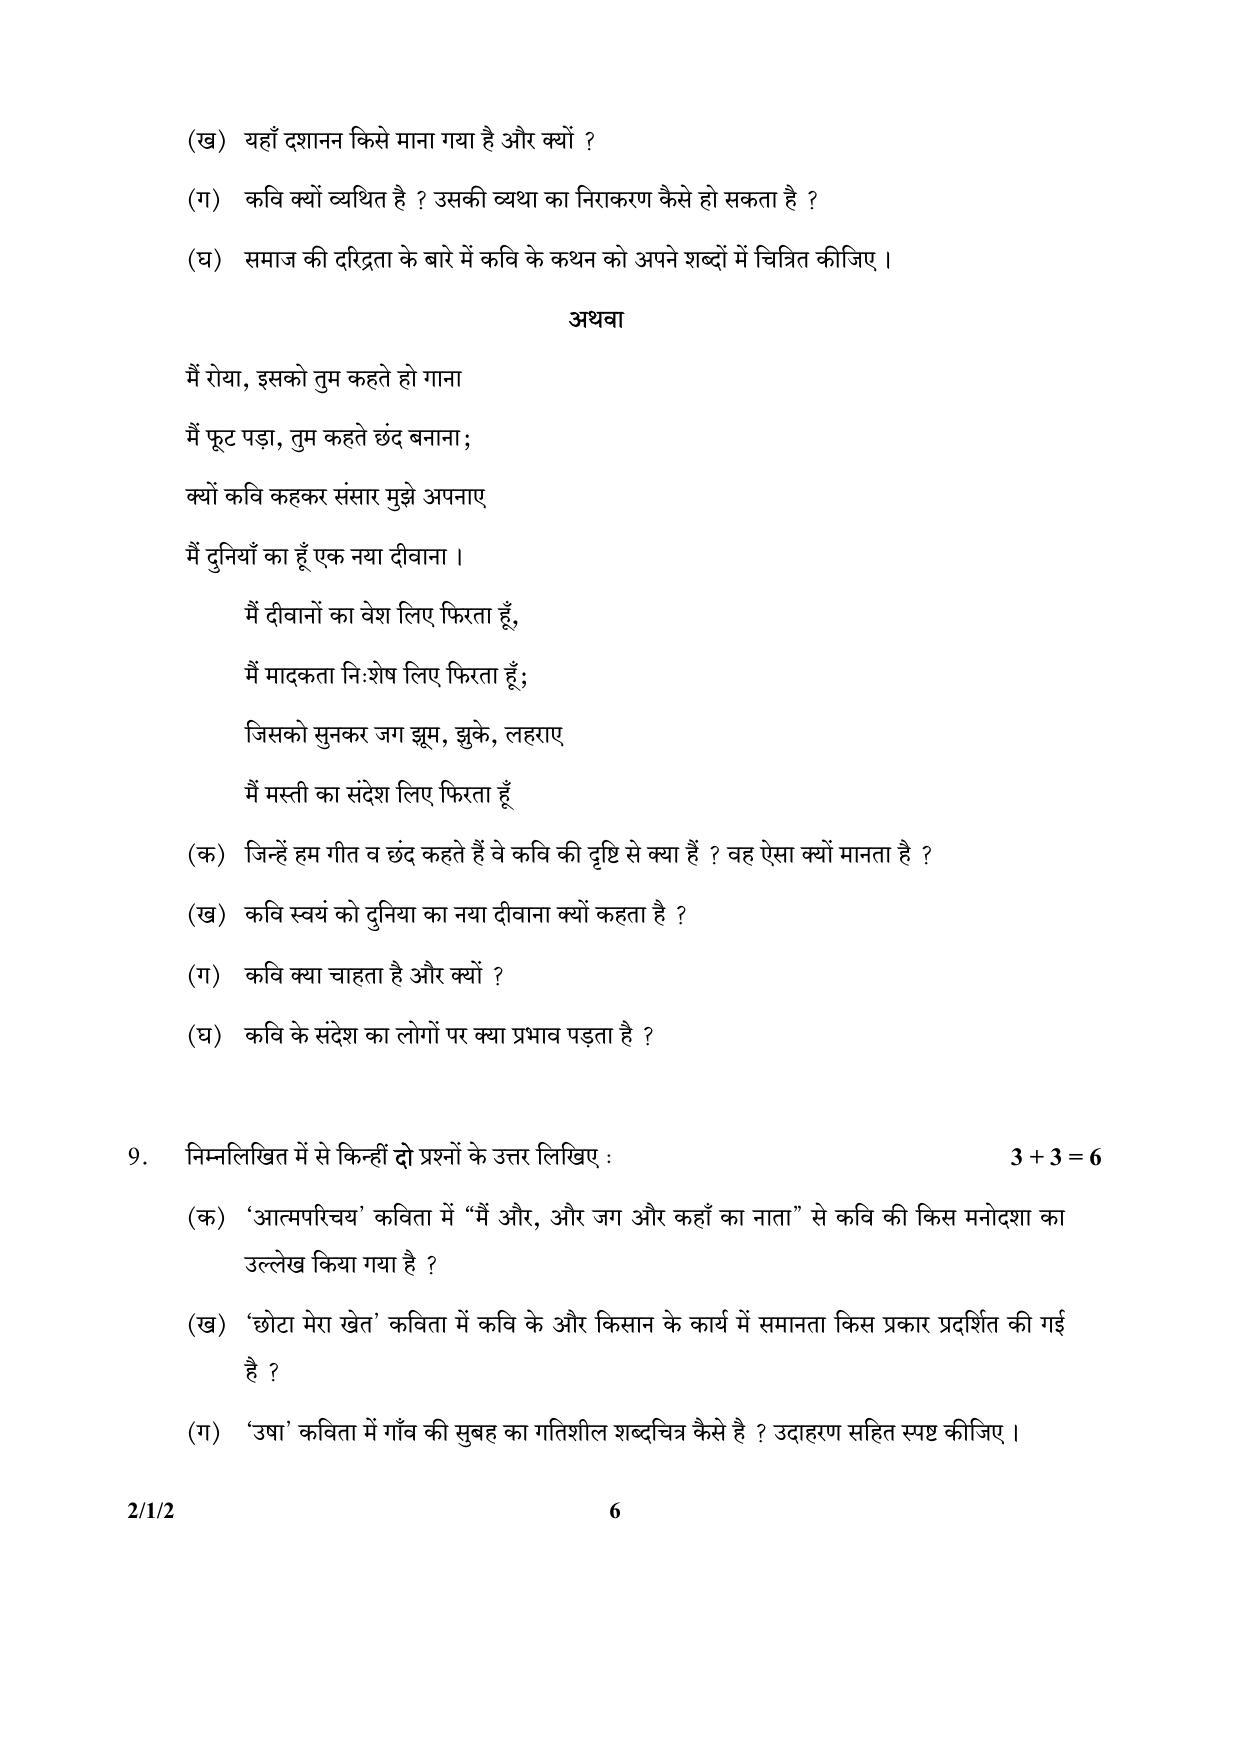 CBSE Class 12 2-1-2 (Hindi) 2017-comptt Question Paper - Page 6